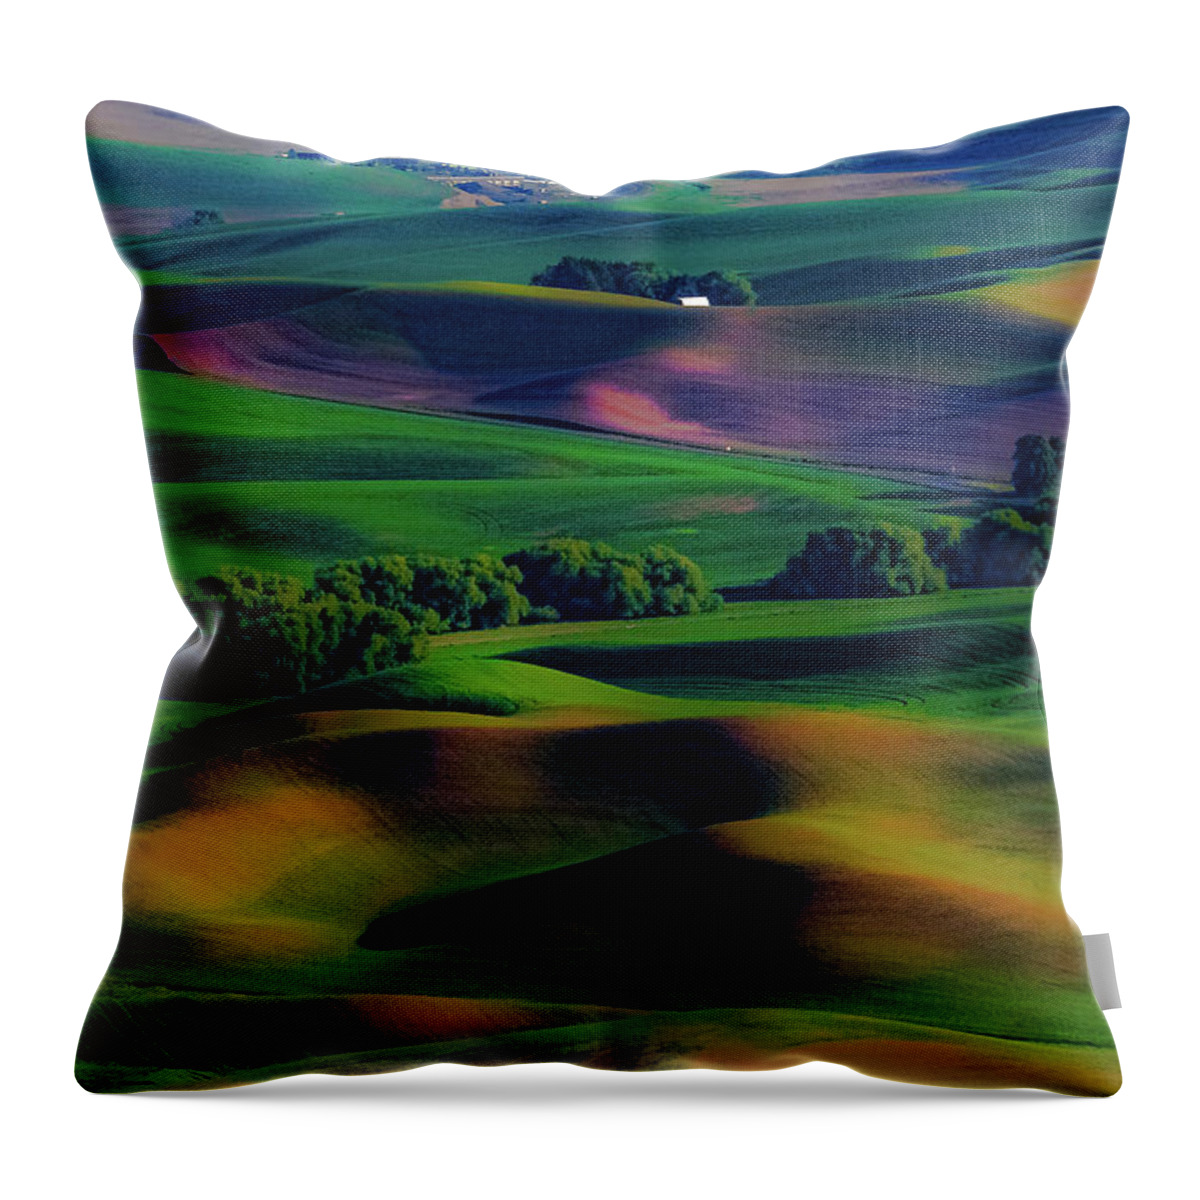 Palouse; Steptoe Butte; Rolling Hills; Farmland; Nature; Spring; Steptoe Butte State Park; Eastern Washington; Pnw; Hills; Wheat Fields Throw Pillow featuring the photograph Palouse Hues by Emerita Wheeling